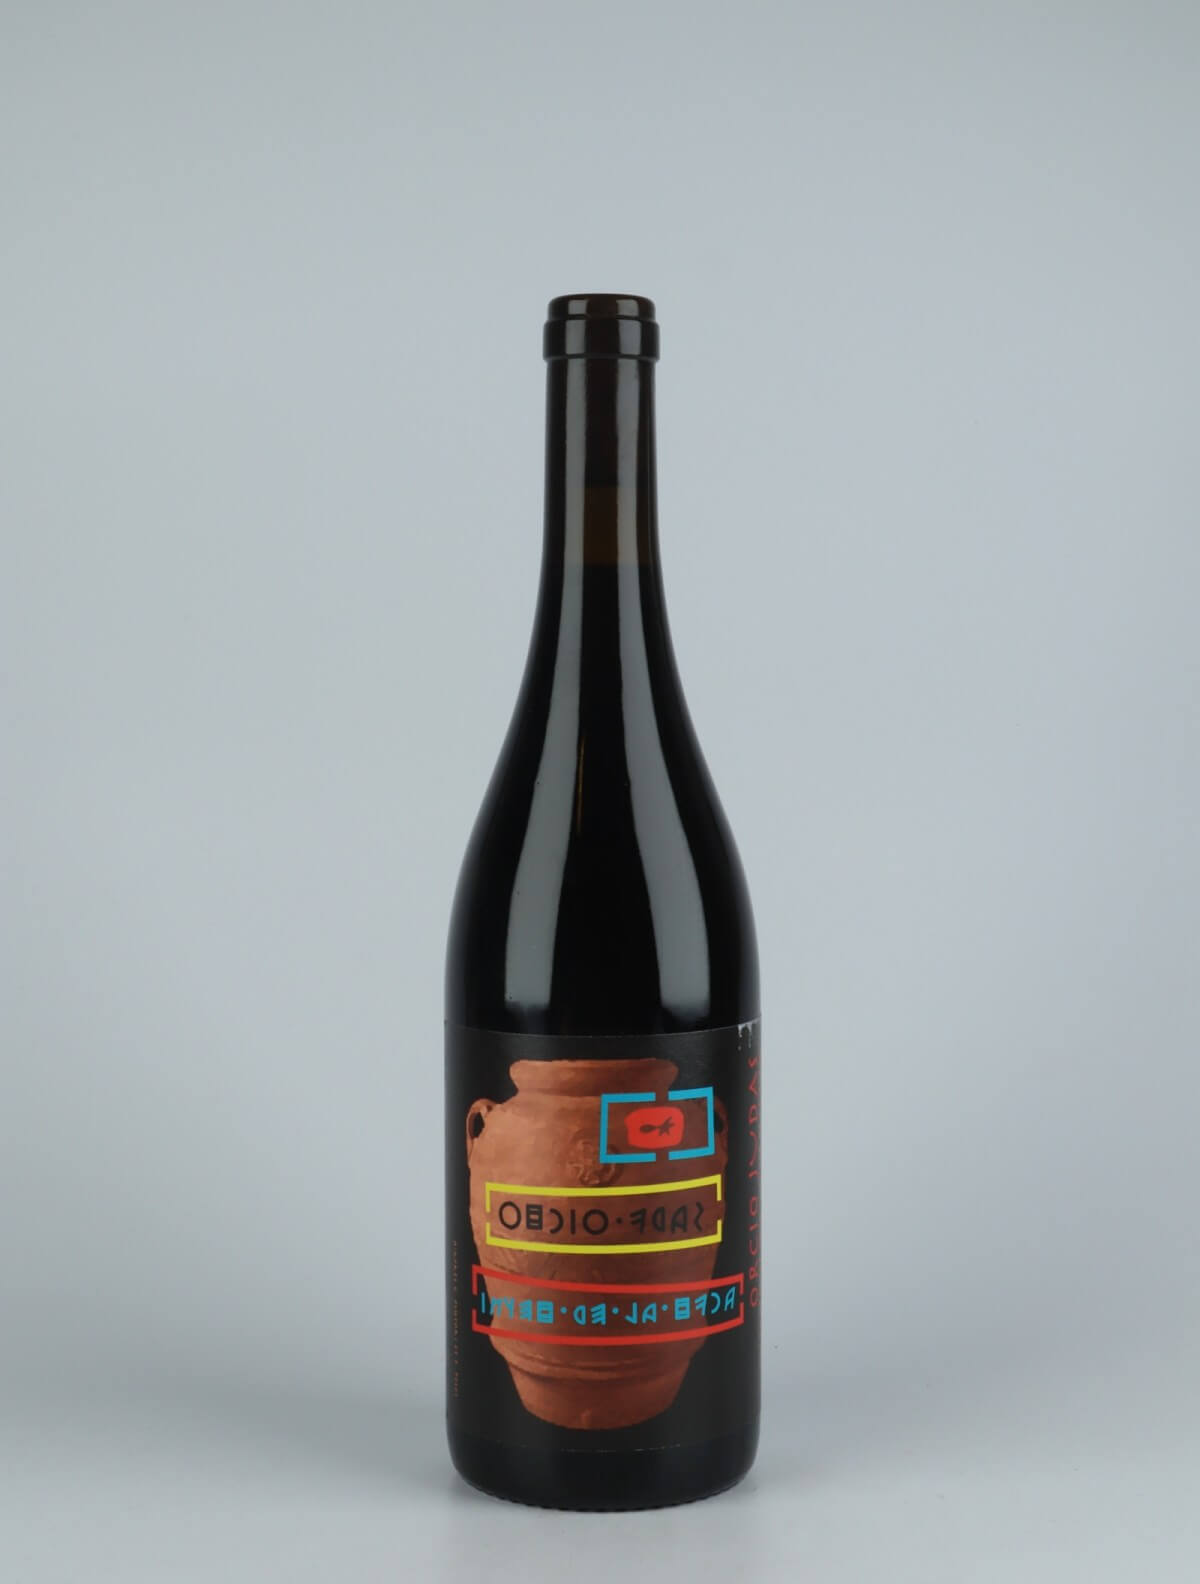 A bottle 2020 Orcio Judas Red wine from , Rousillon in France